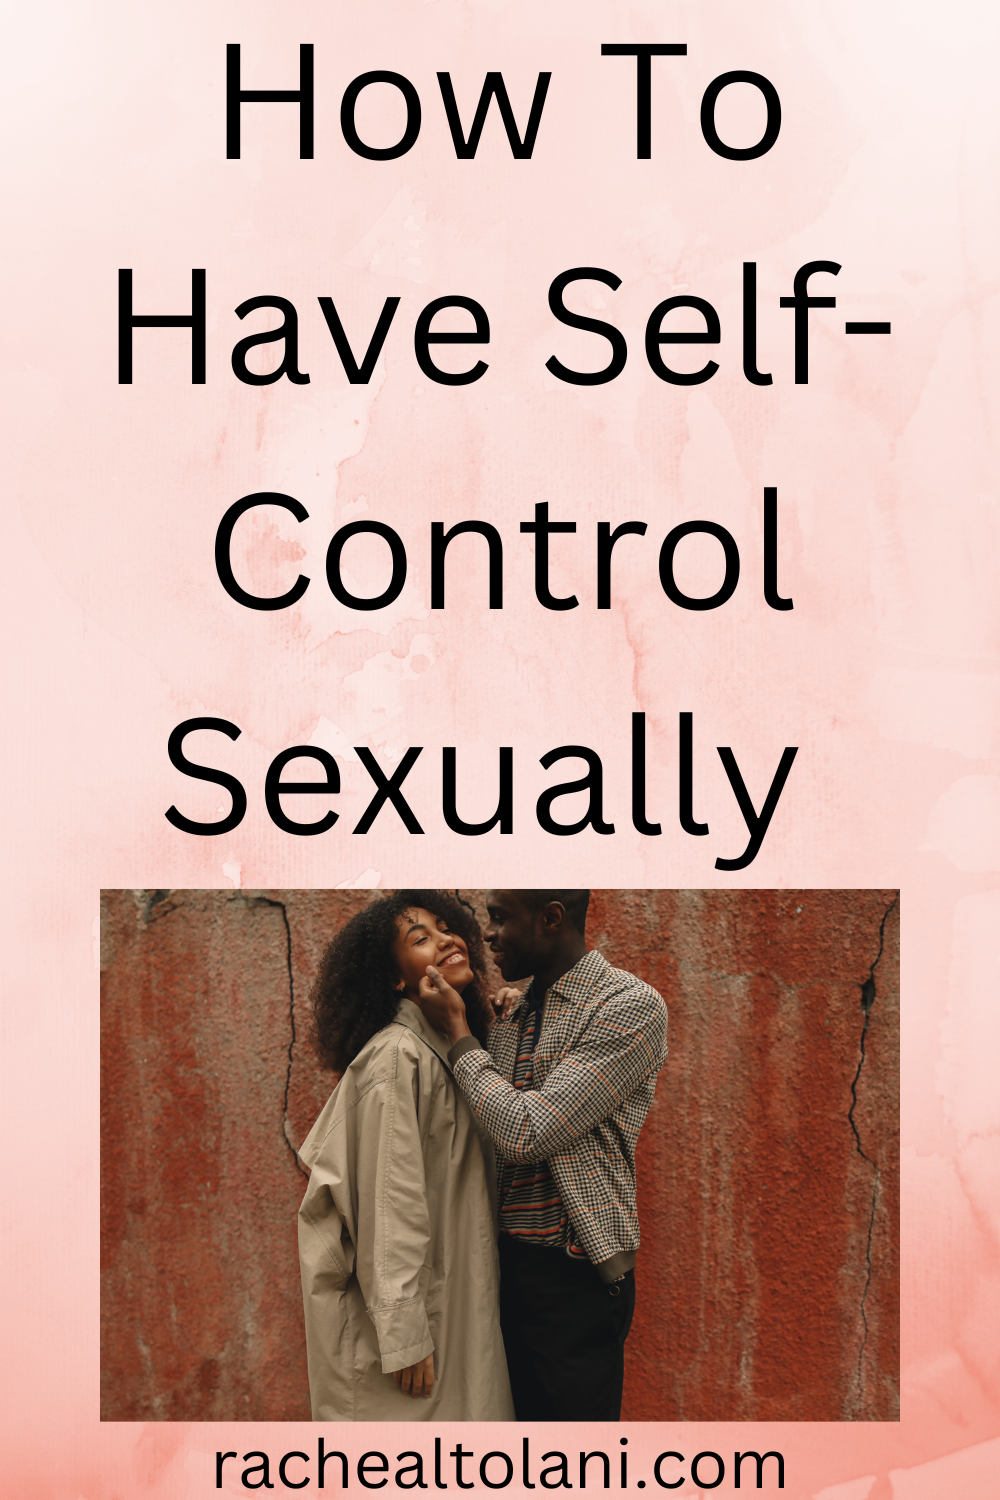 How to have self-control sexually